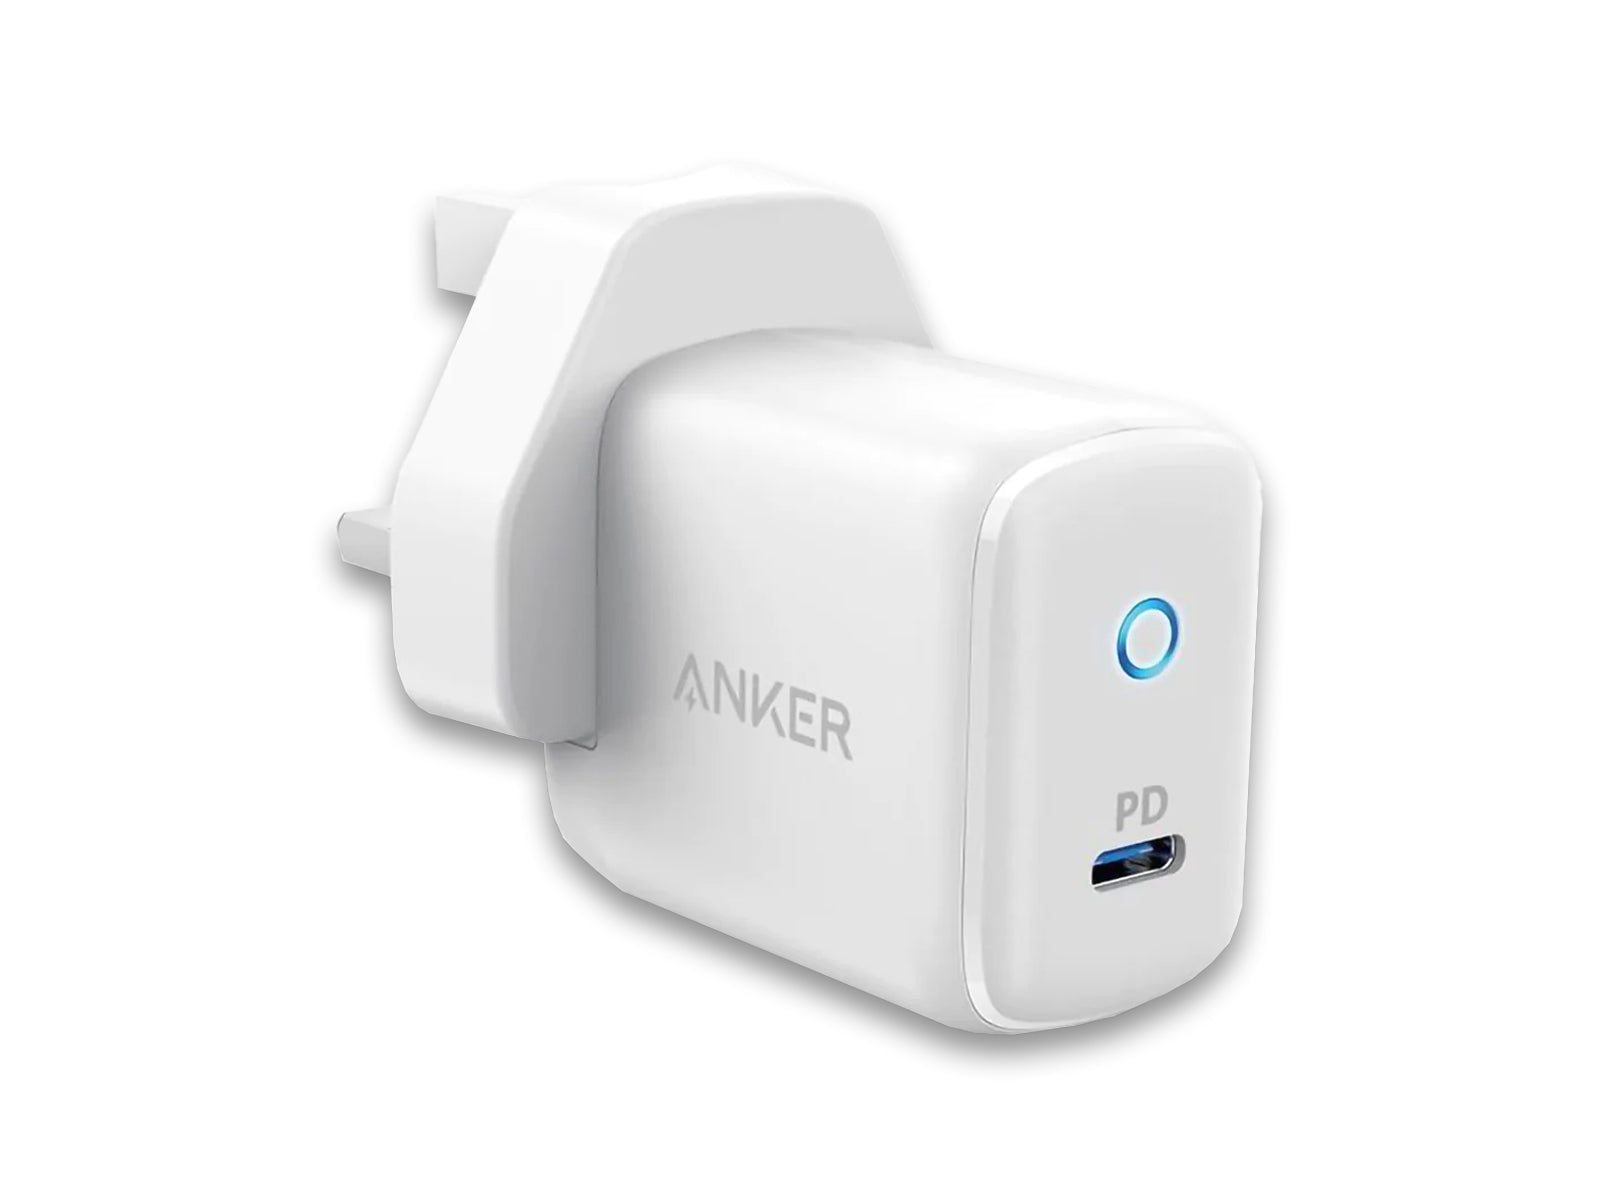 Anker PowerPort PD USB-C 18W Fast Charger Port View